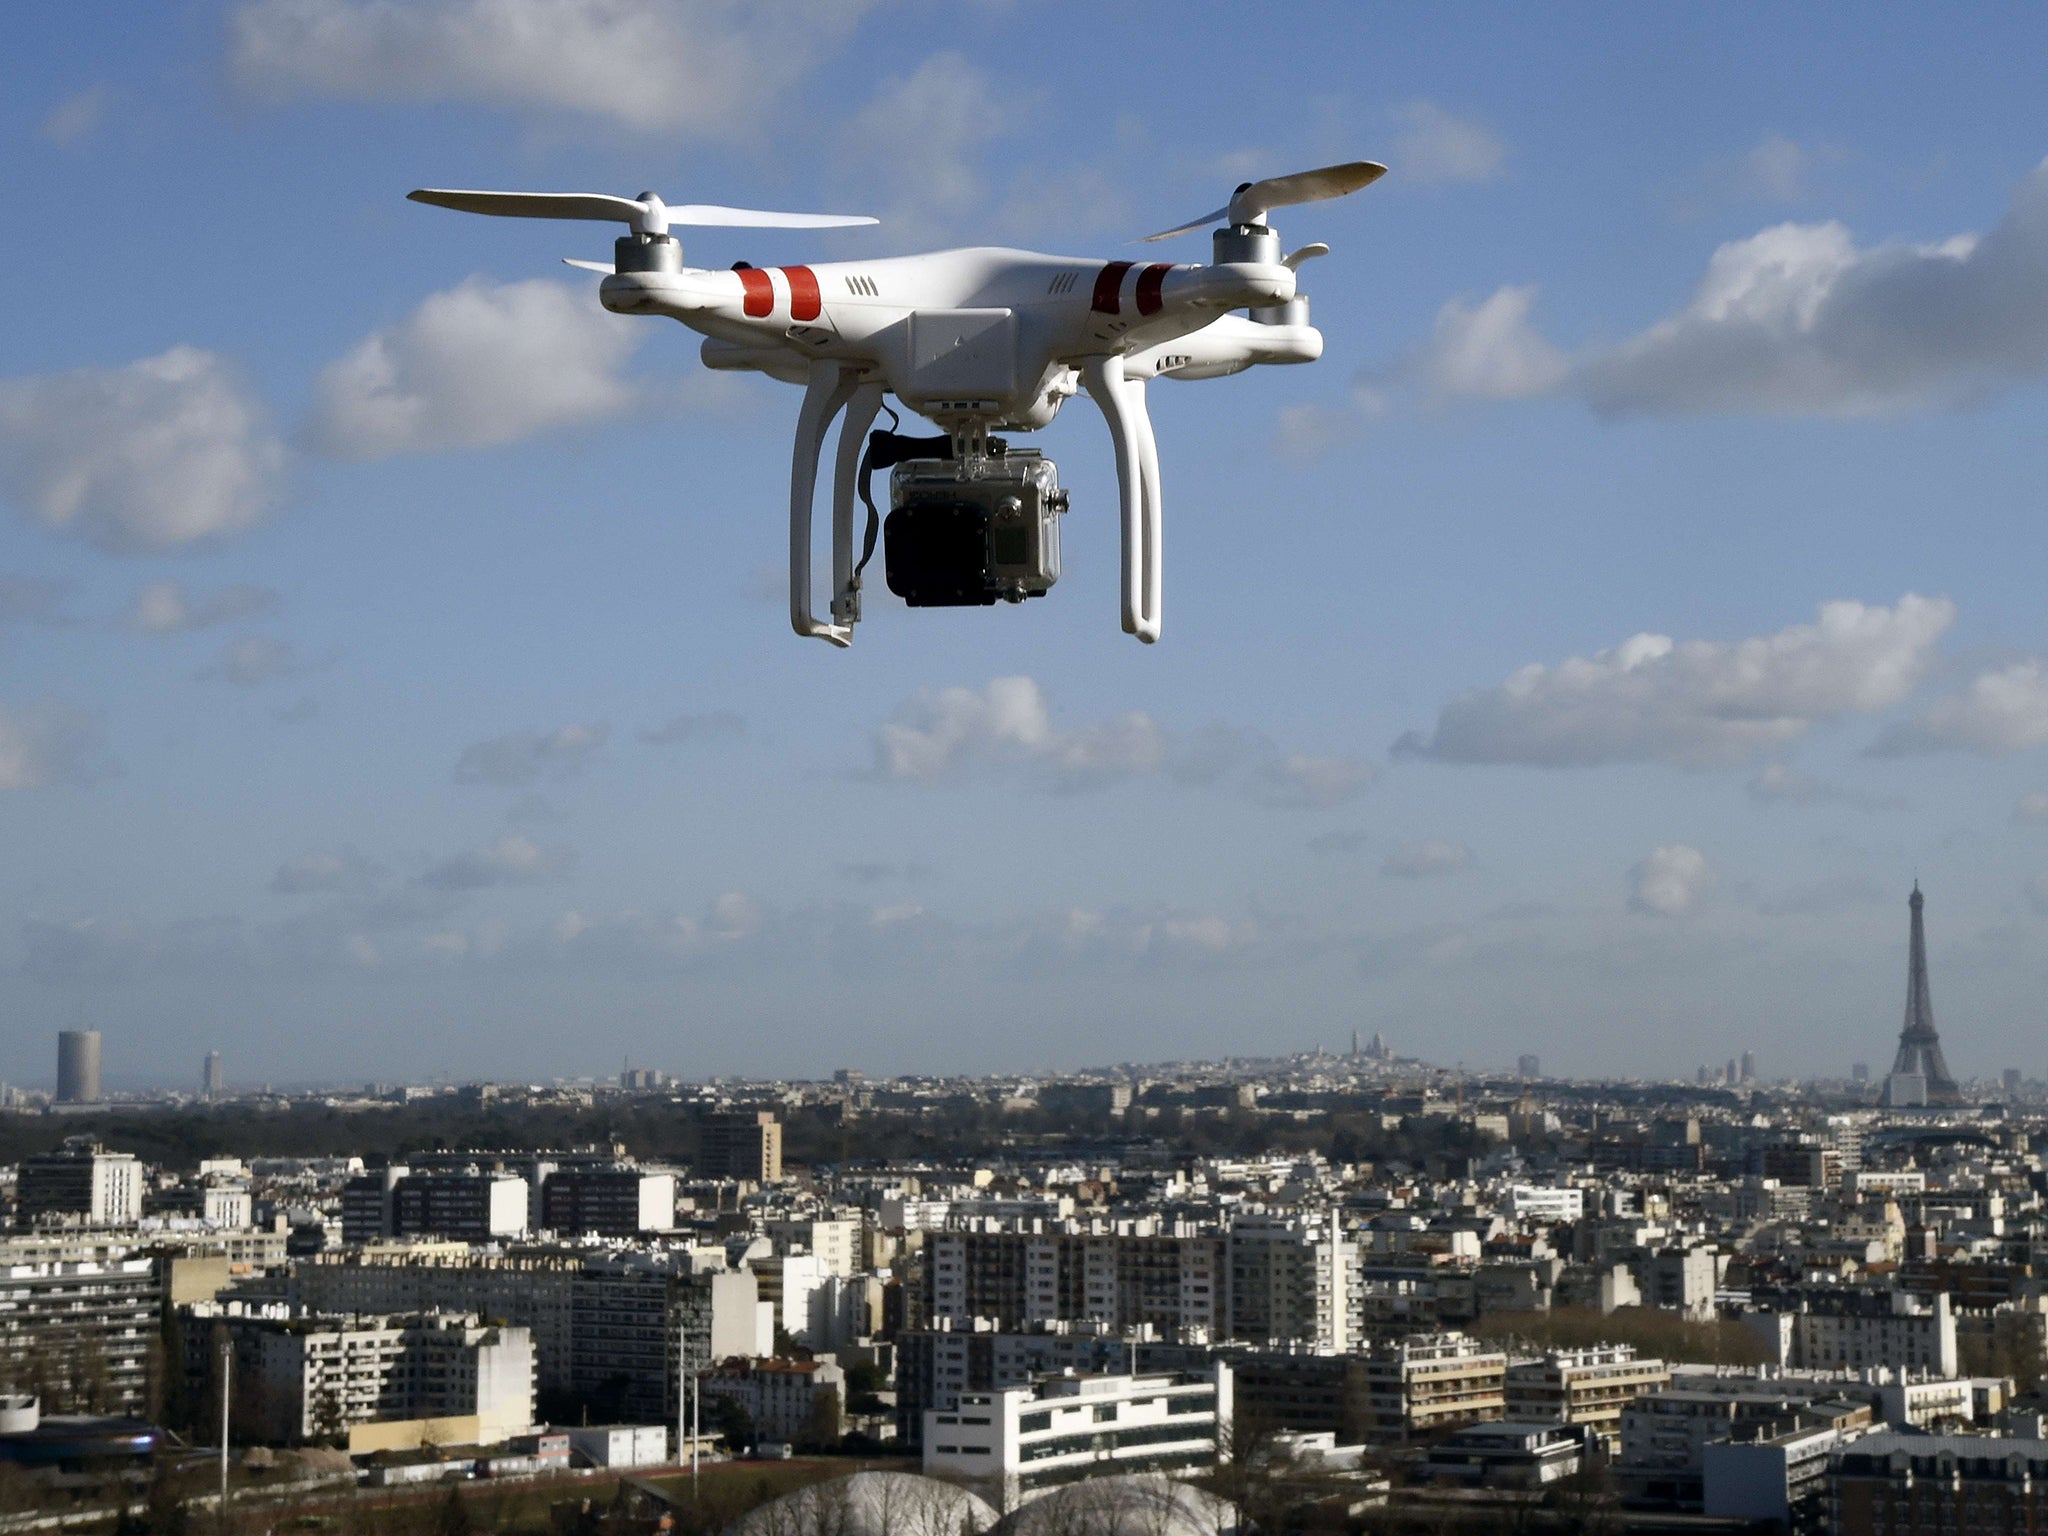 A House of Lords report called this week for ‘geo-fencing’ to hardwire ‘no-fly’ zones into drones